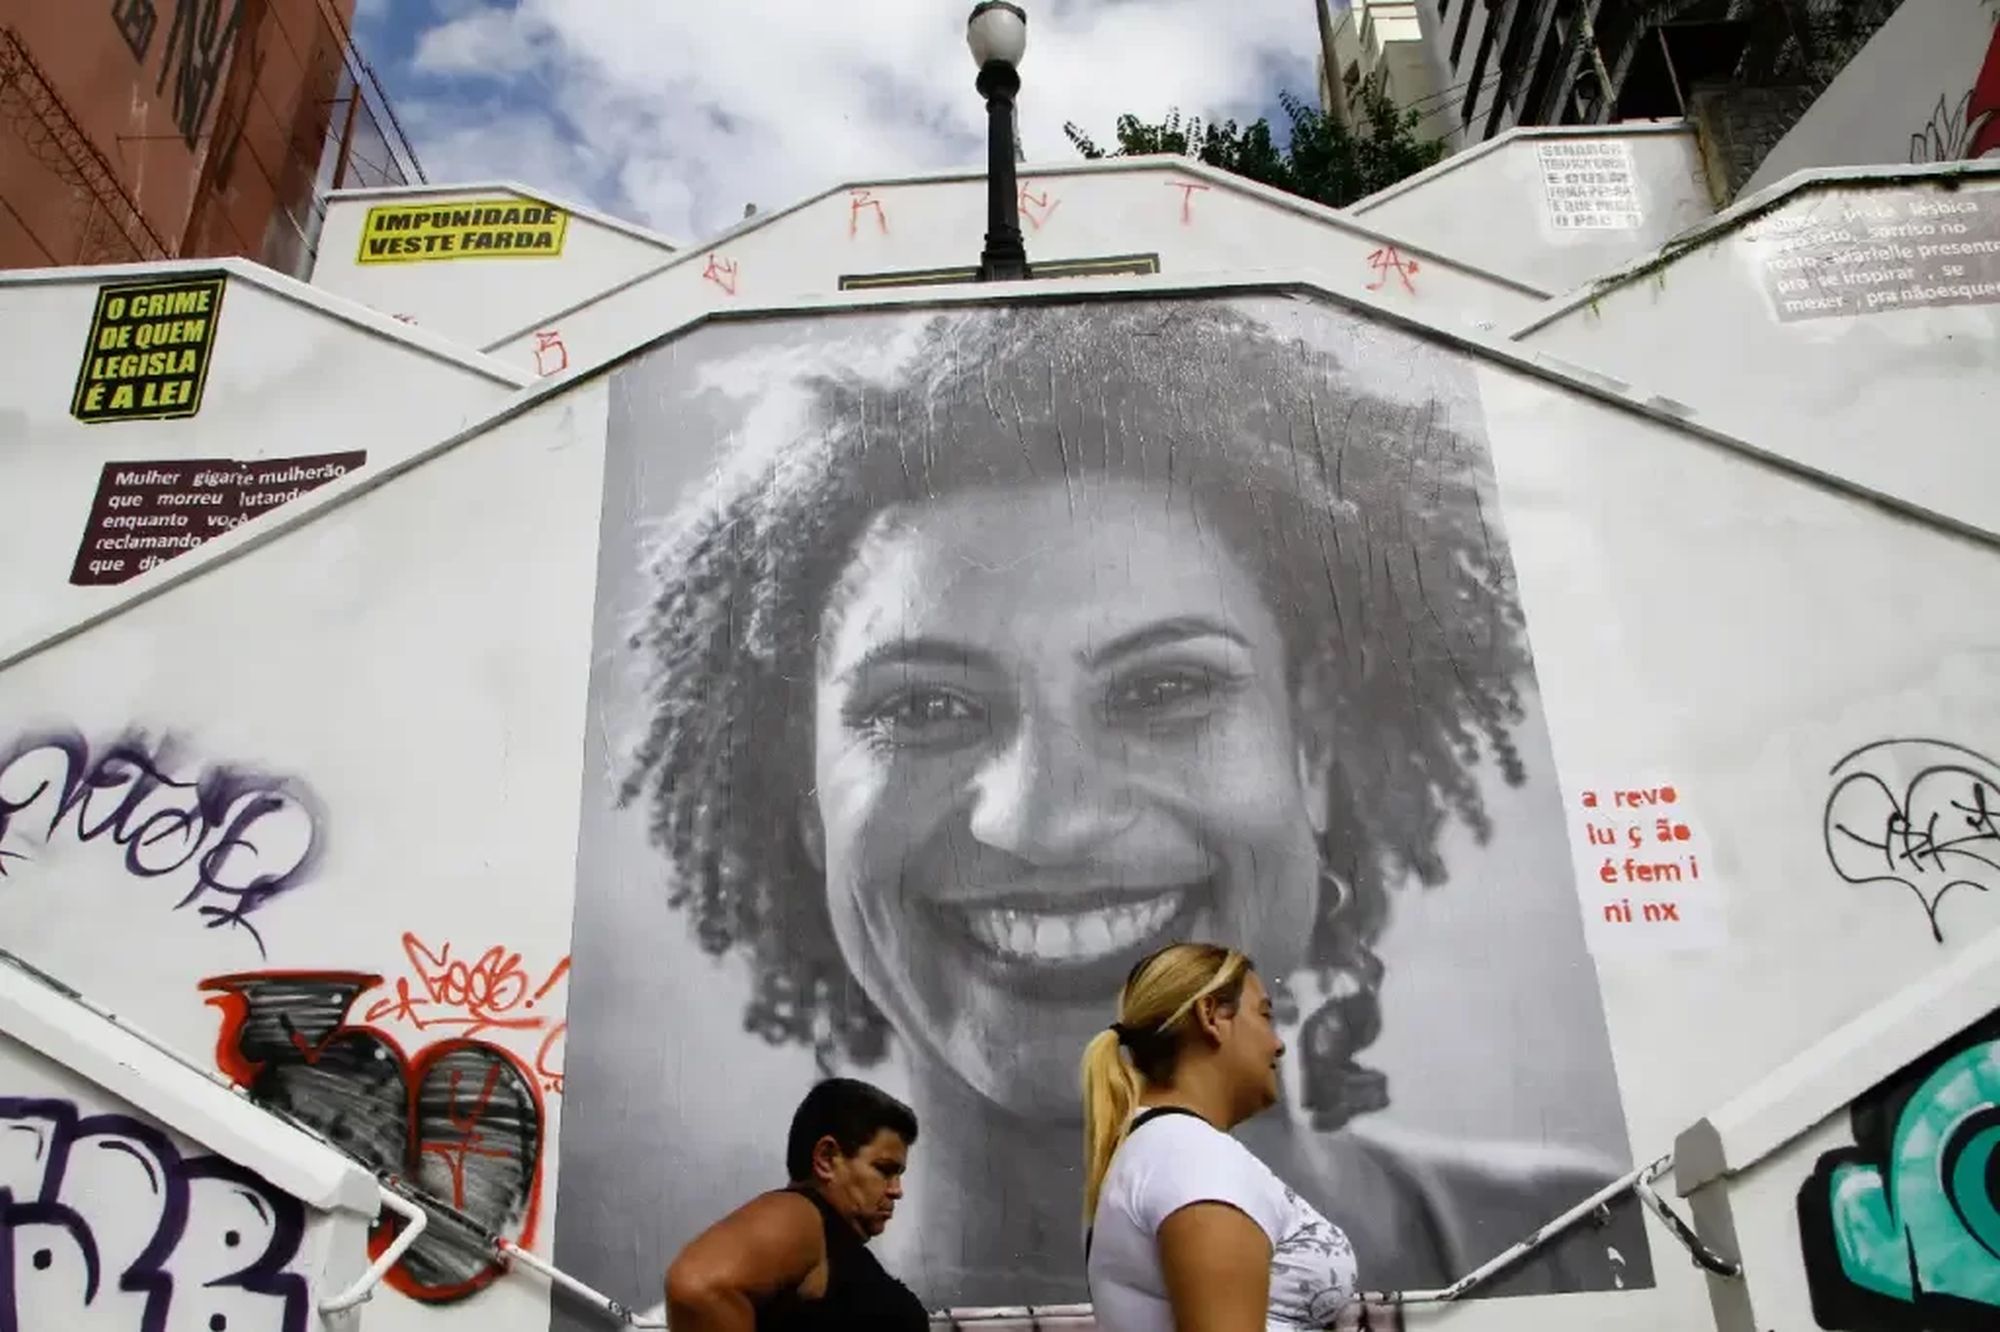 Marielle Franco was 38 at the time of her murder